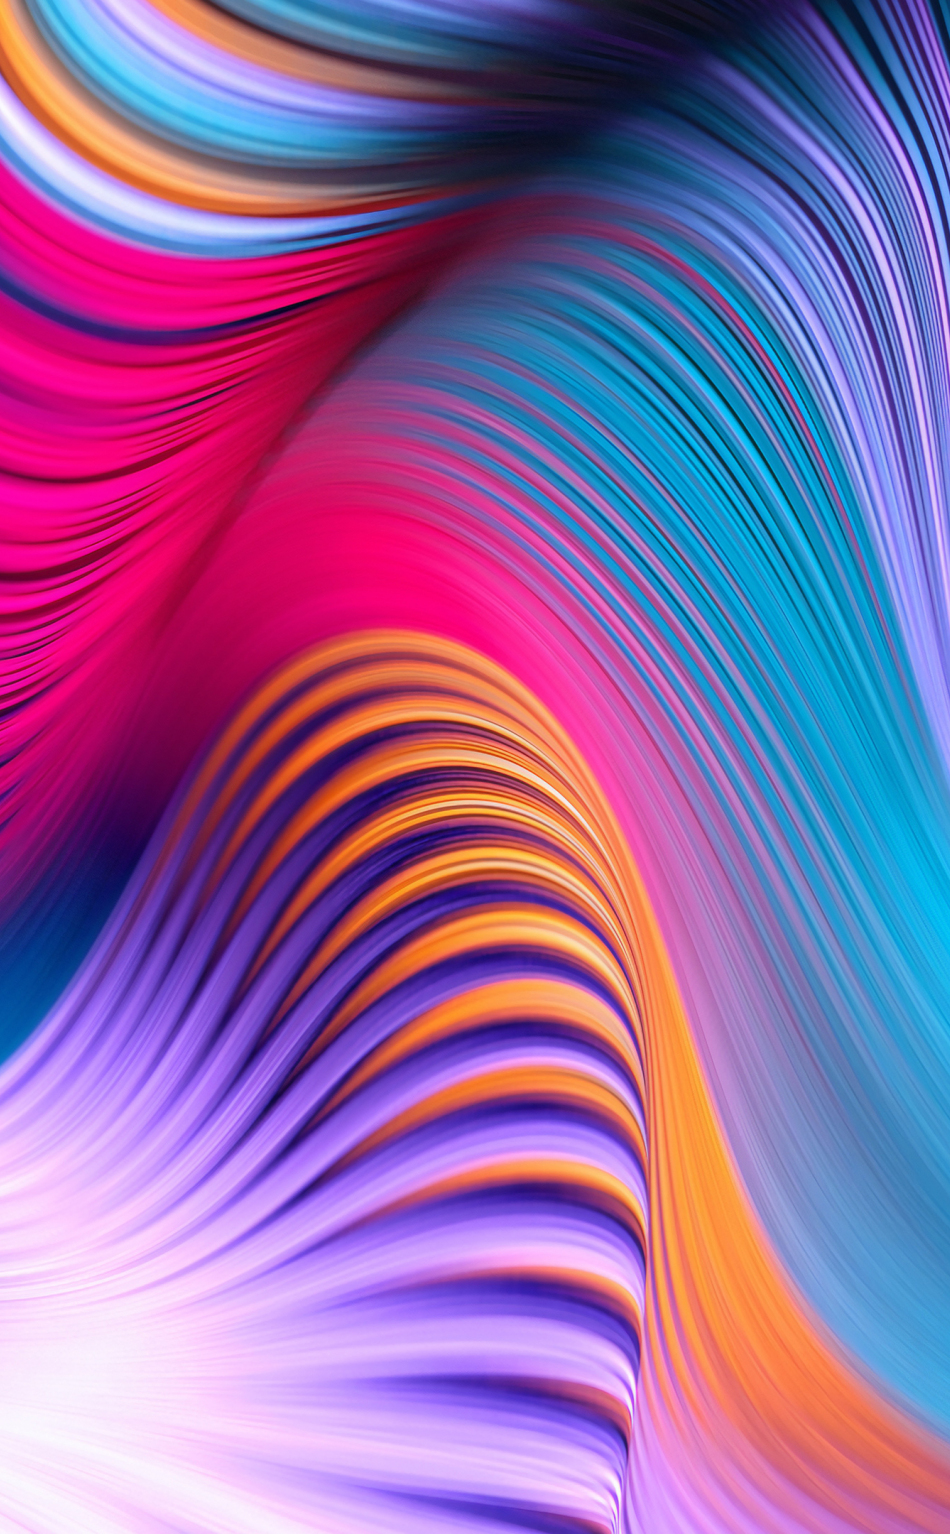 Download wallpaper 950x1534 colorful, abstract, art, waves, iphone ...